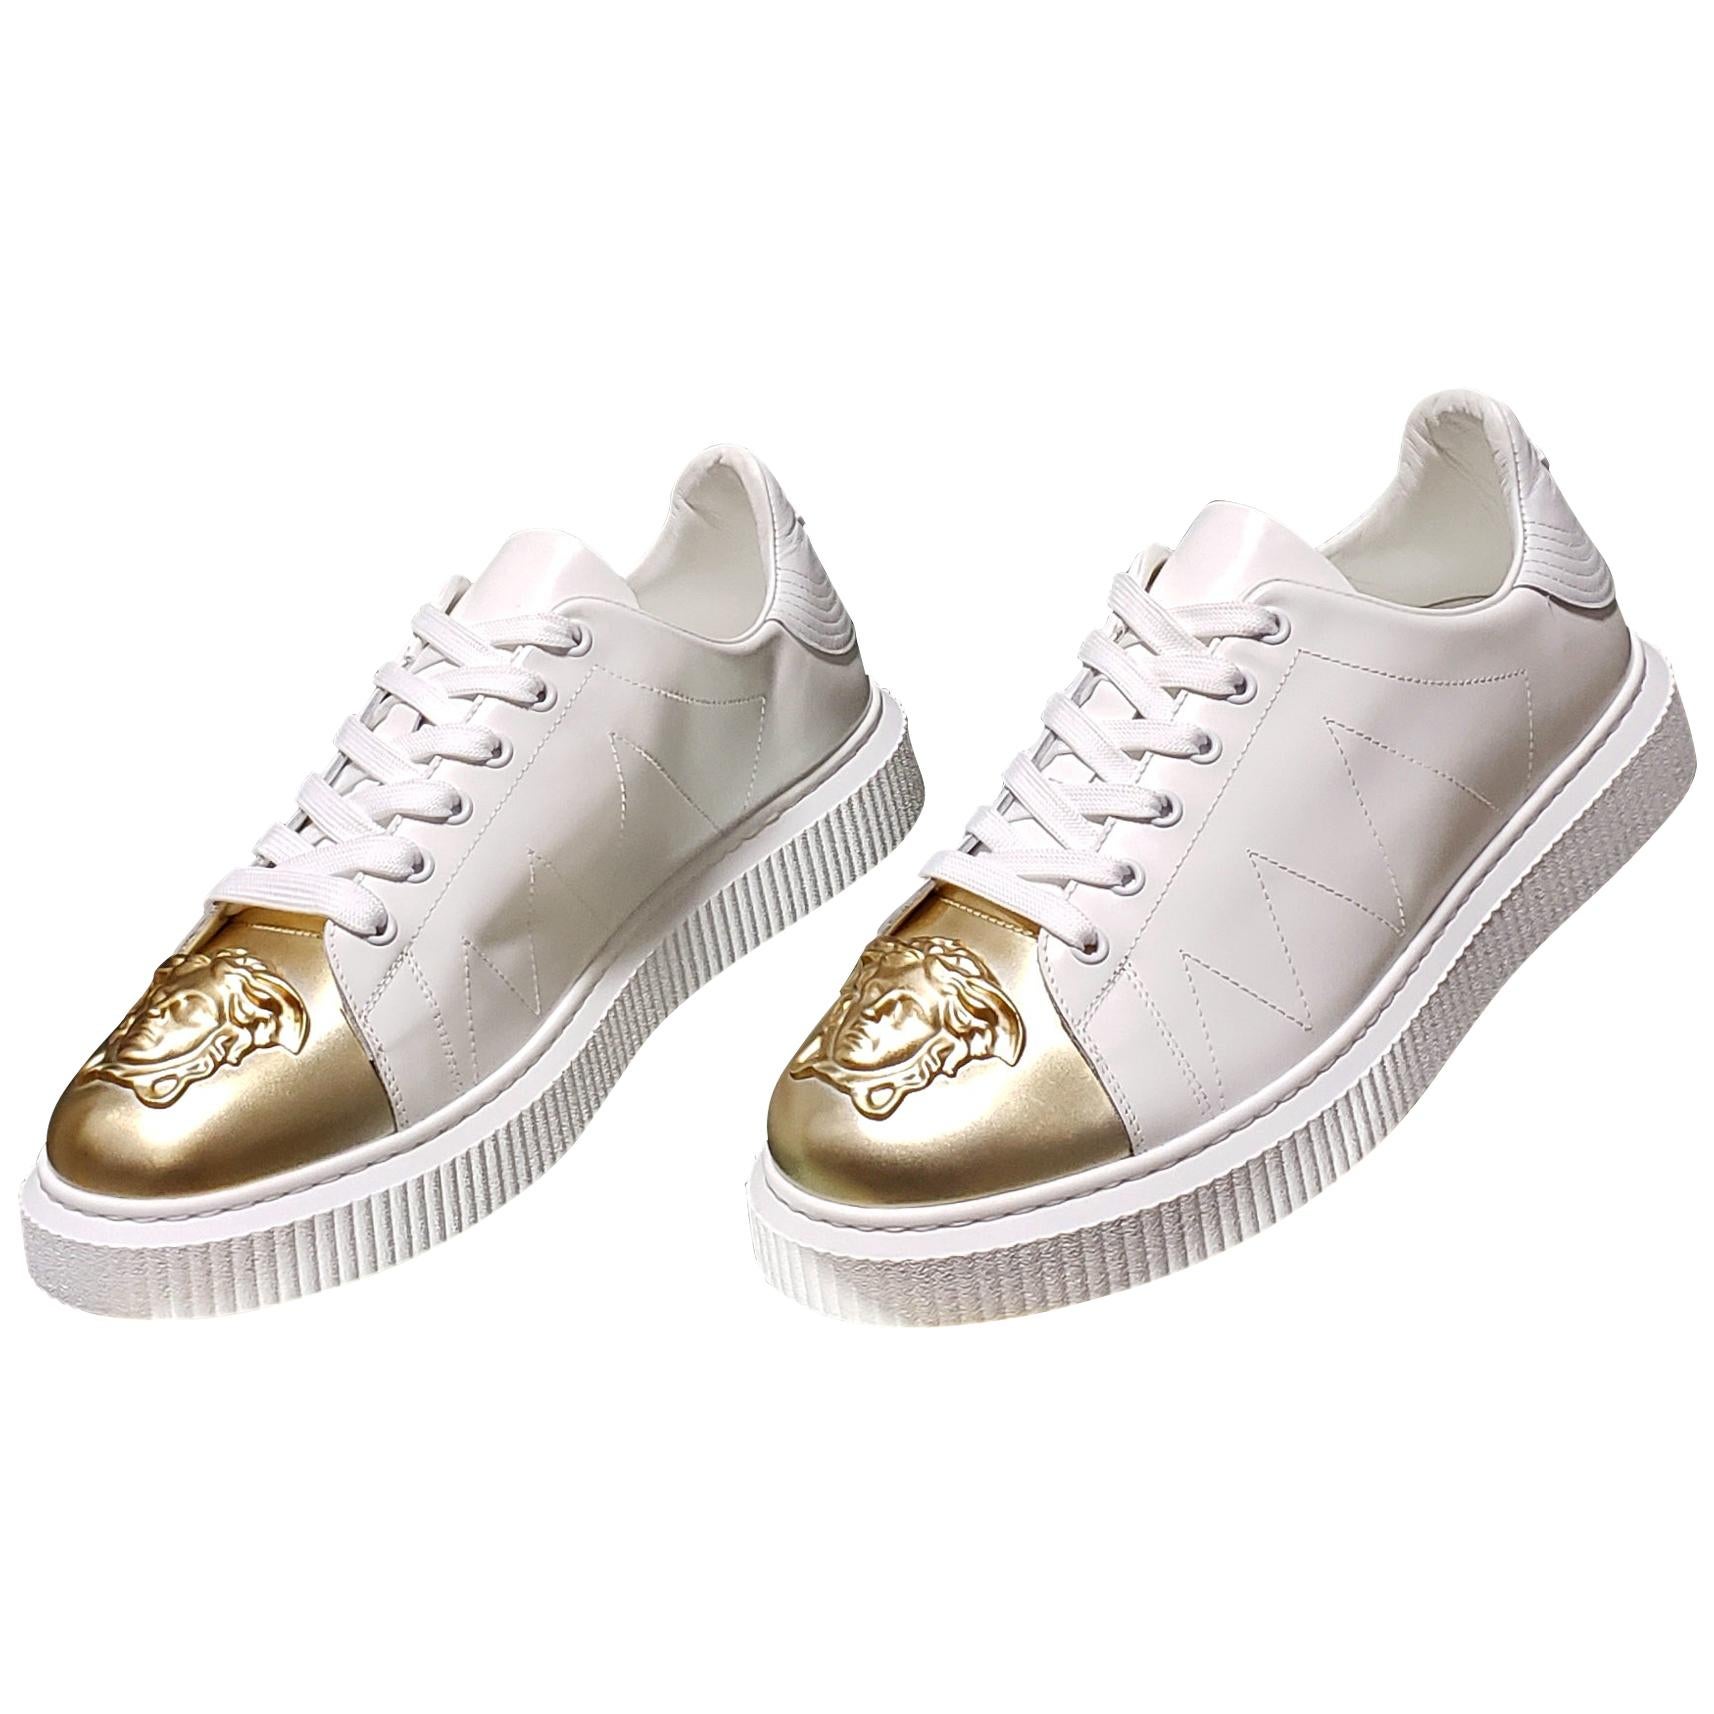 New VERSACE LEATHER SNEAKERS WHITE GOLD 